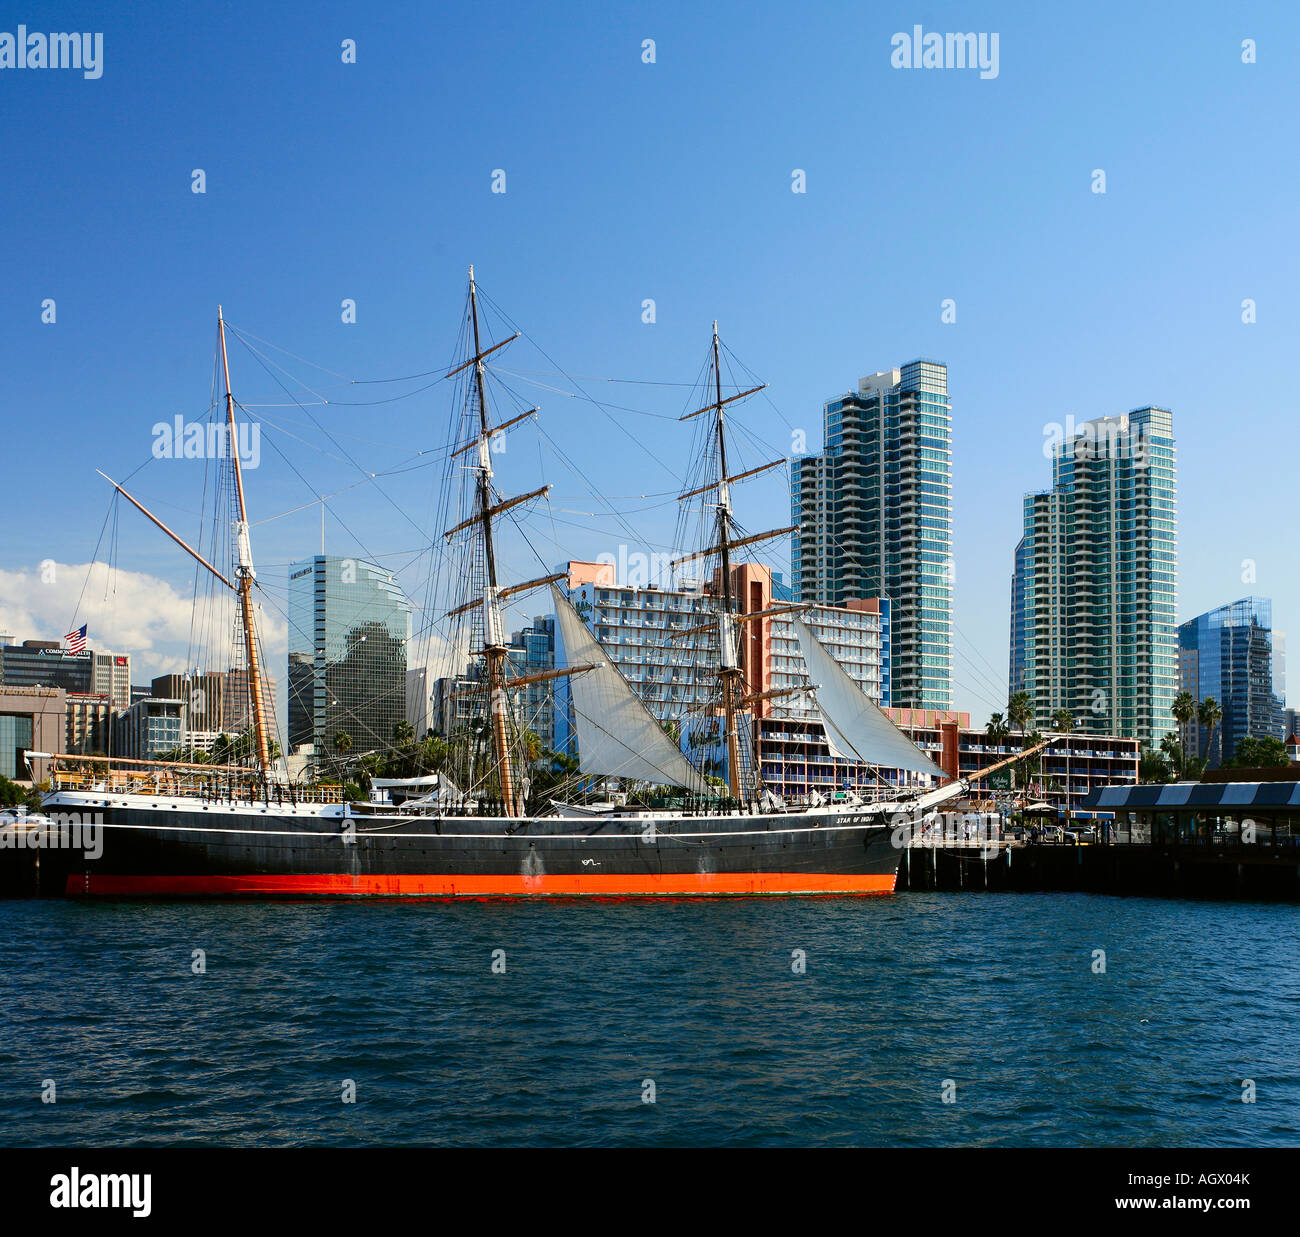 Star of India, built in 1863 as Euterpe. Loacated in San Diego, California, USA. Stock Photo